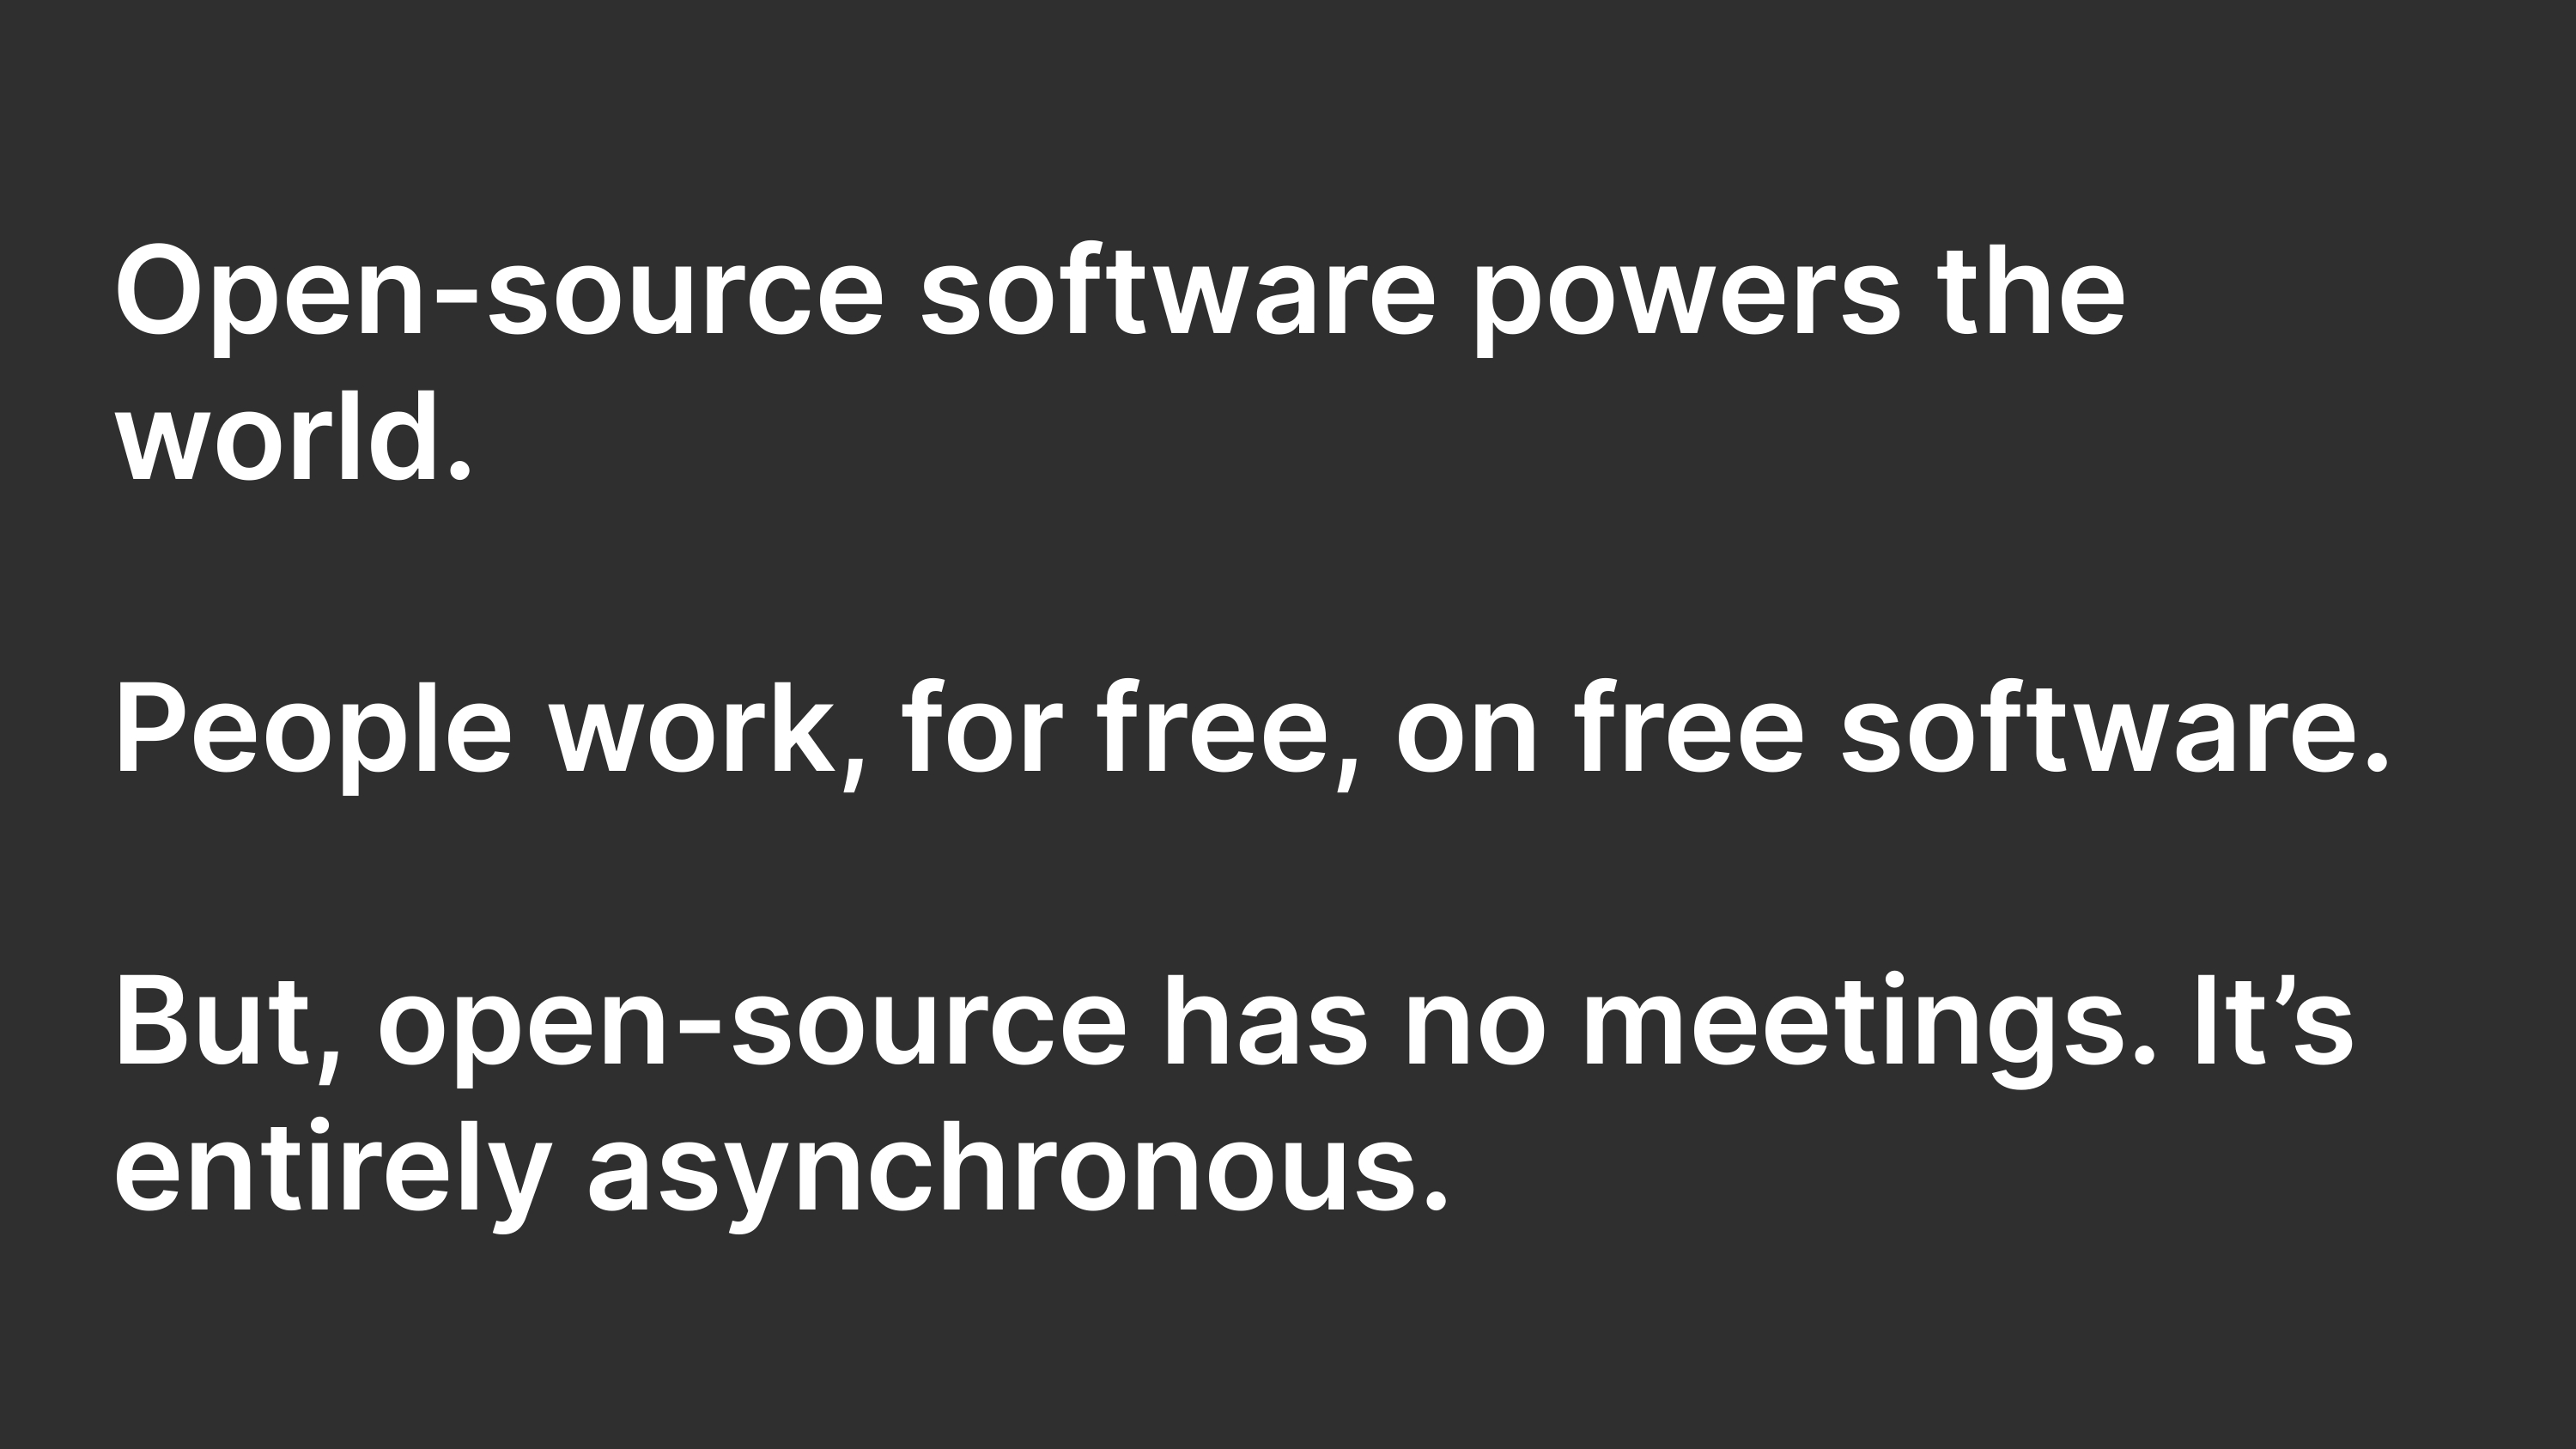 Open-source software powers the world. People work, for free, on free software. But, open-source has no meetings. It's entirely asynchronous.